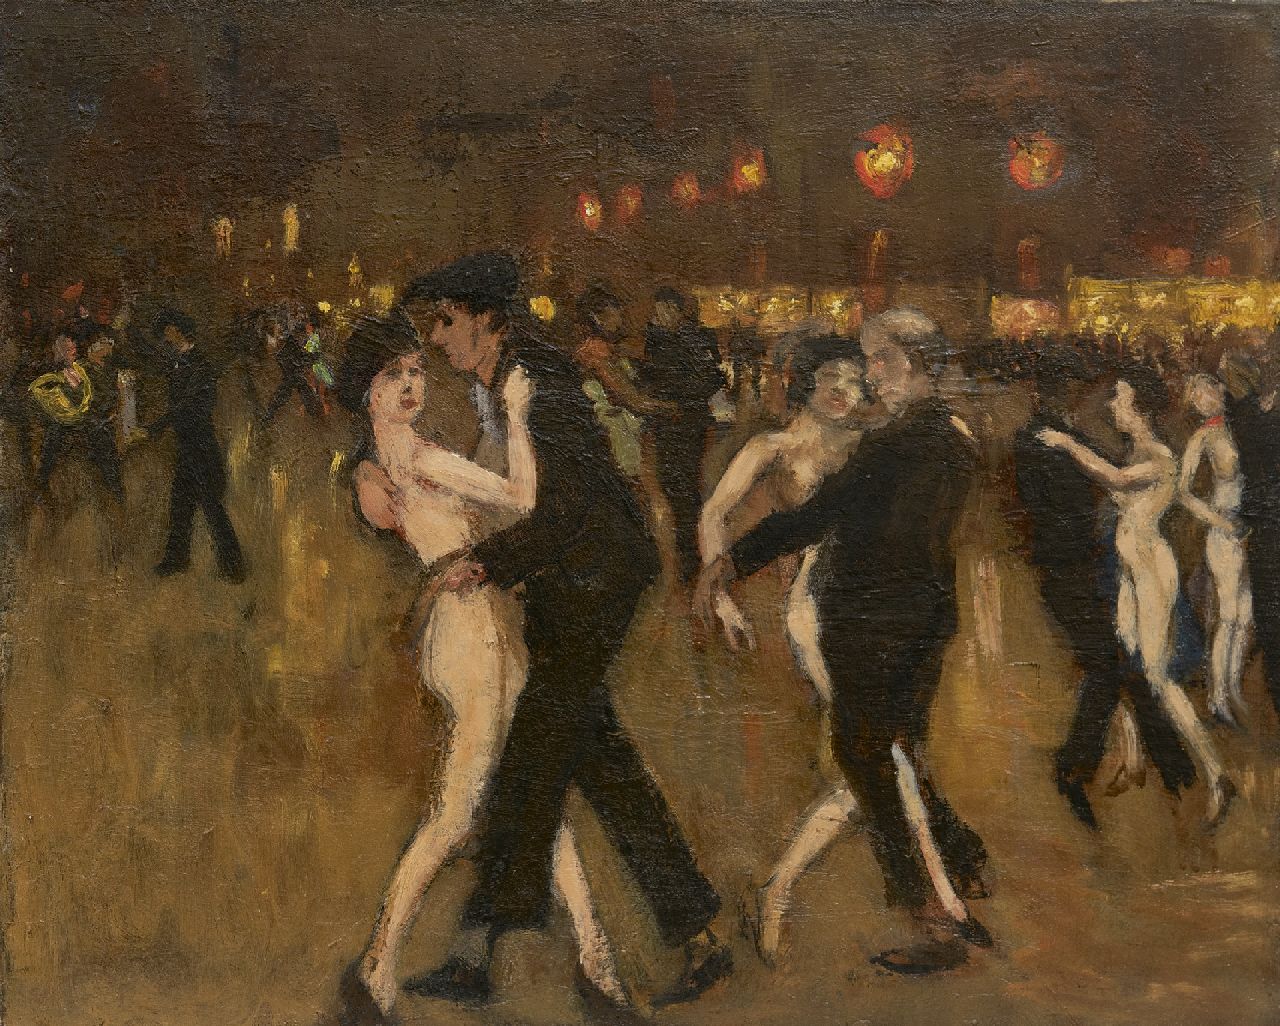 Mackenzie M.H.  | Marie Henri Mackenzie, Ball with nudes Moulin Rouge, oil on canvas 40.3 x 50.5 cm, signed on the stretcher